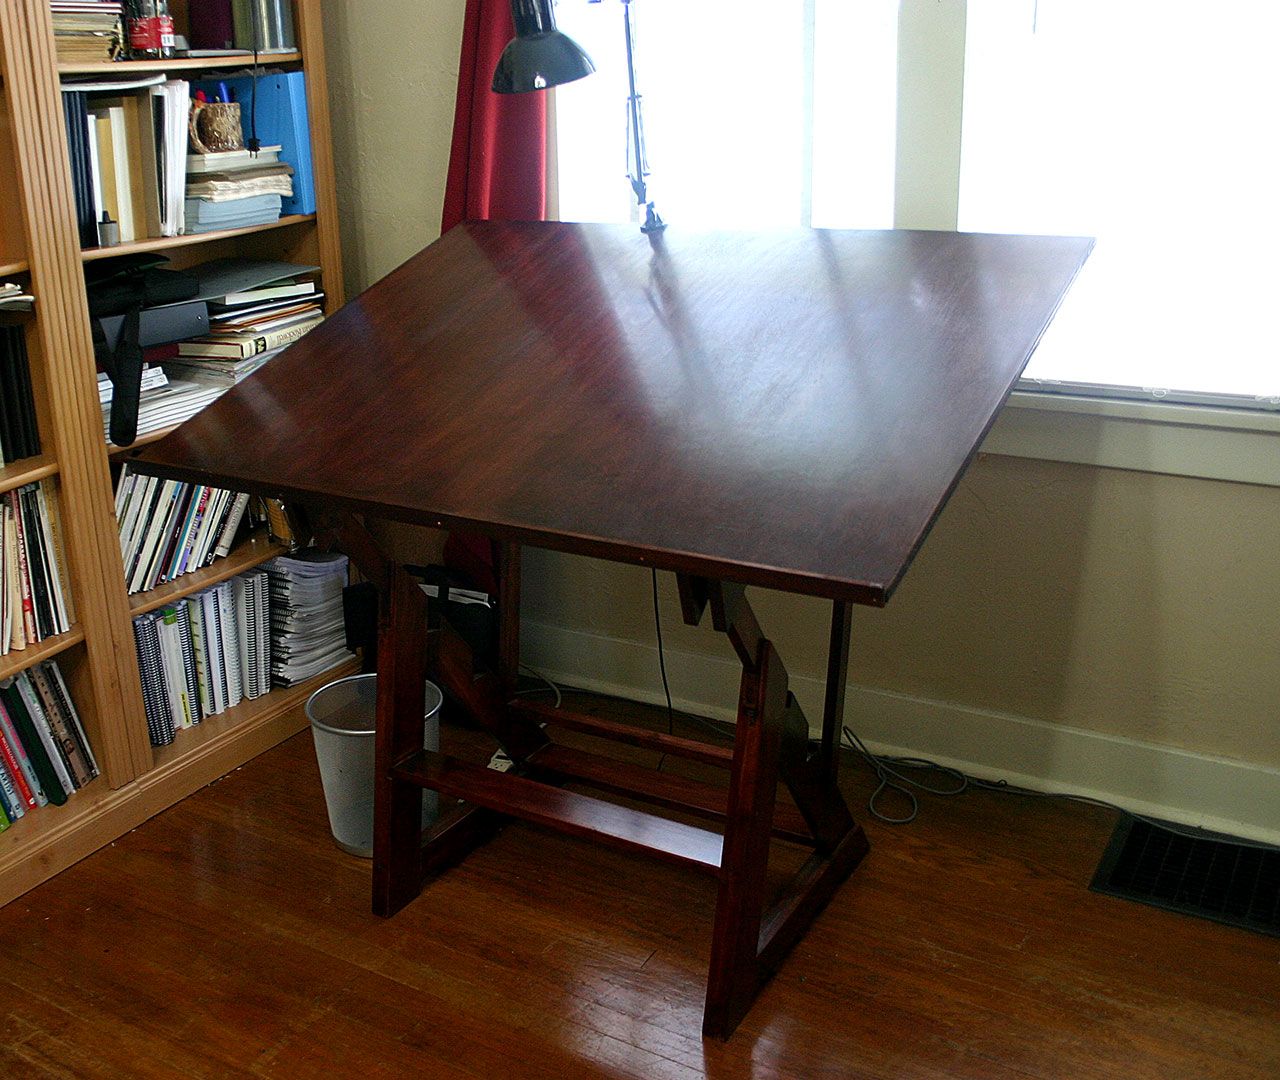 Buy Hand Made Maple Or Cherry Drawing, Drafting Artist Table, made to